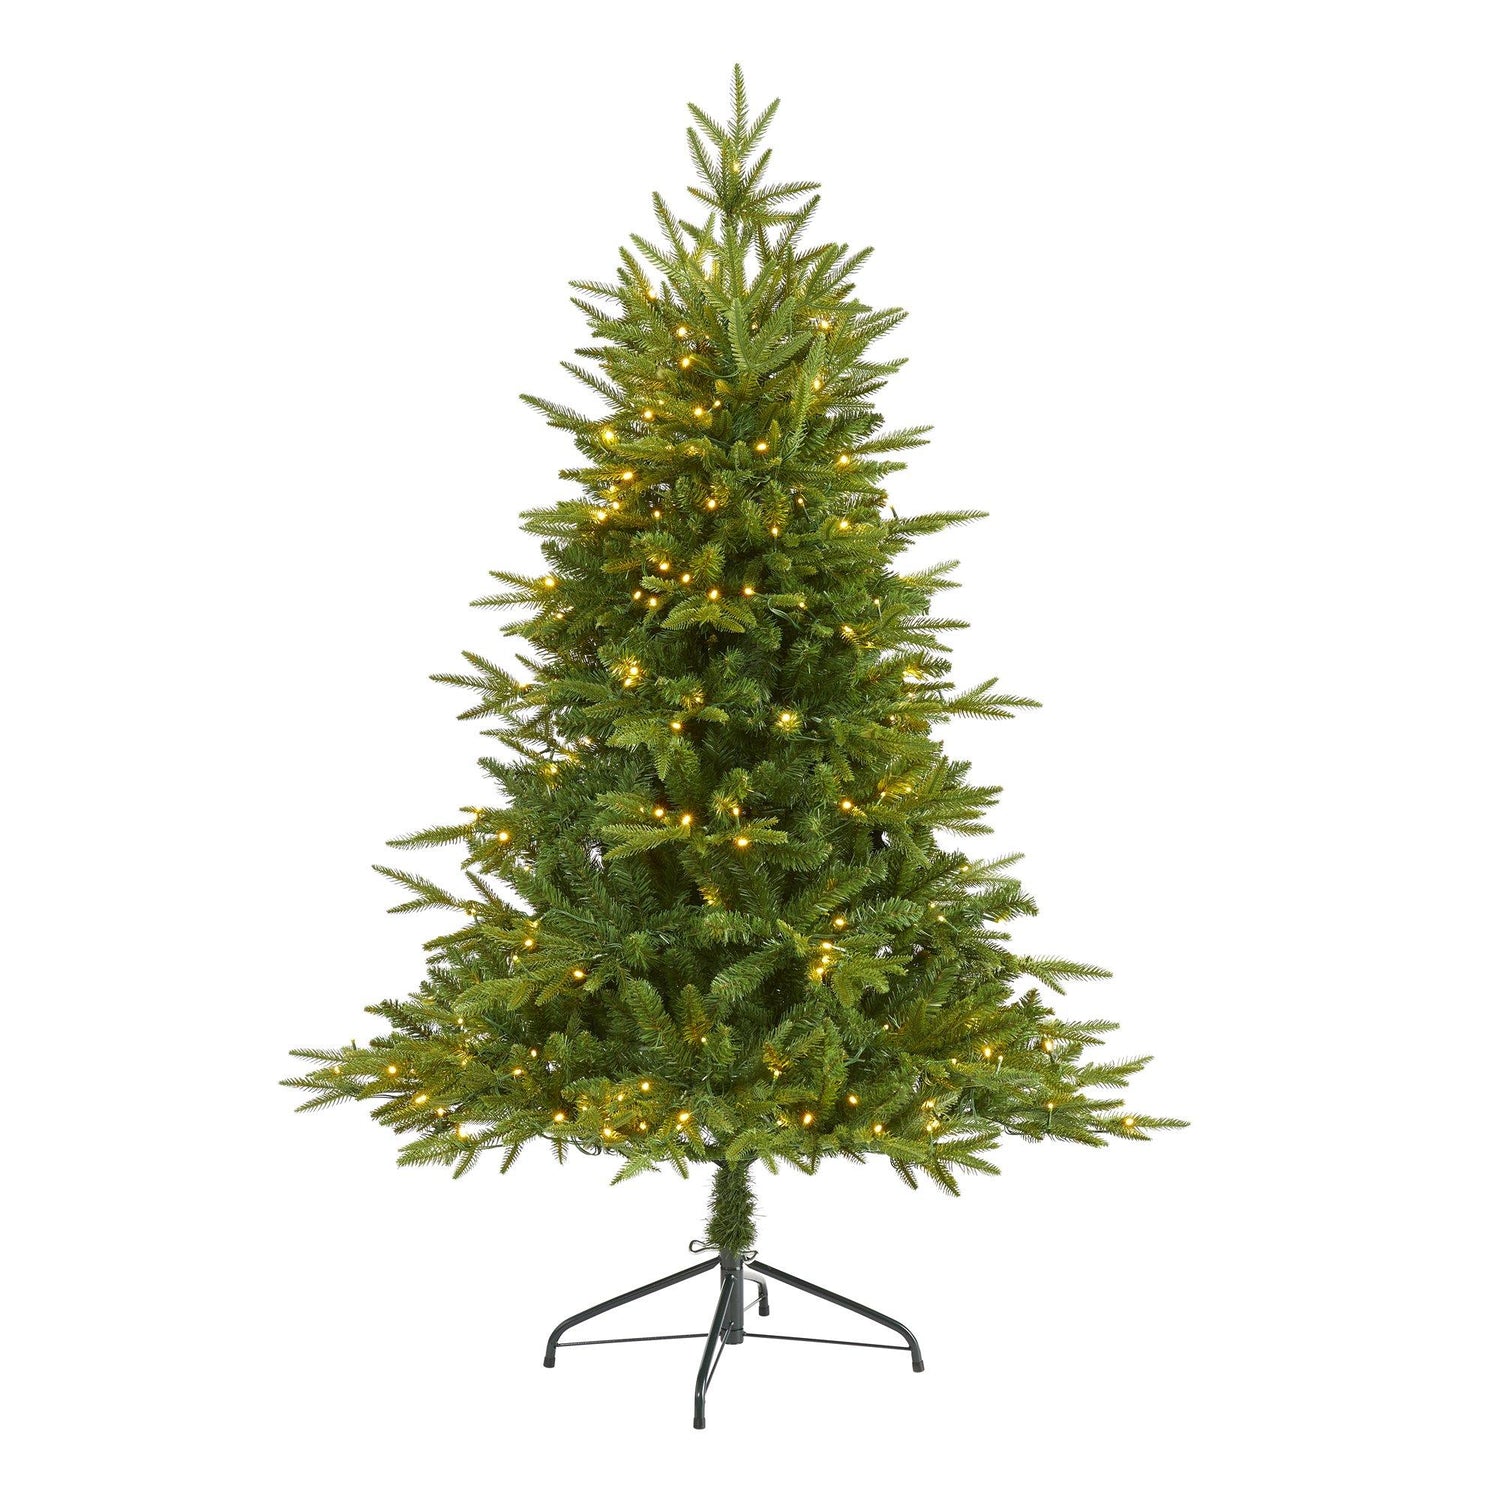 5’ Colorado Mountain Fir “Natural Look” Artificial Christmas Tree with 250 Clear LED Lights